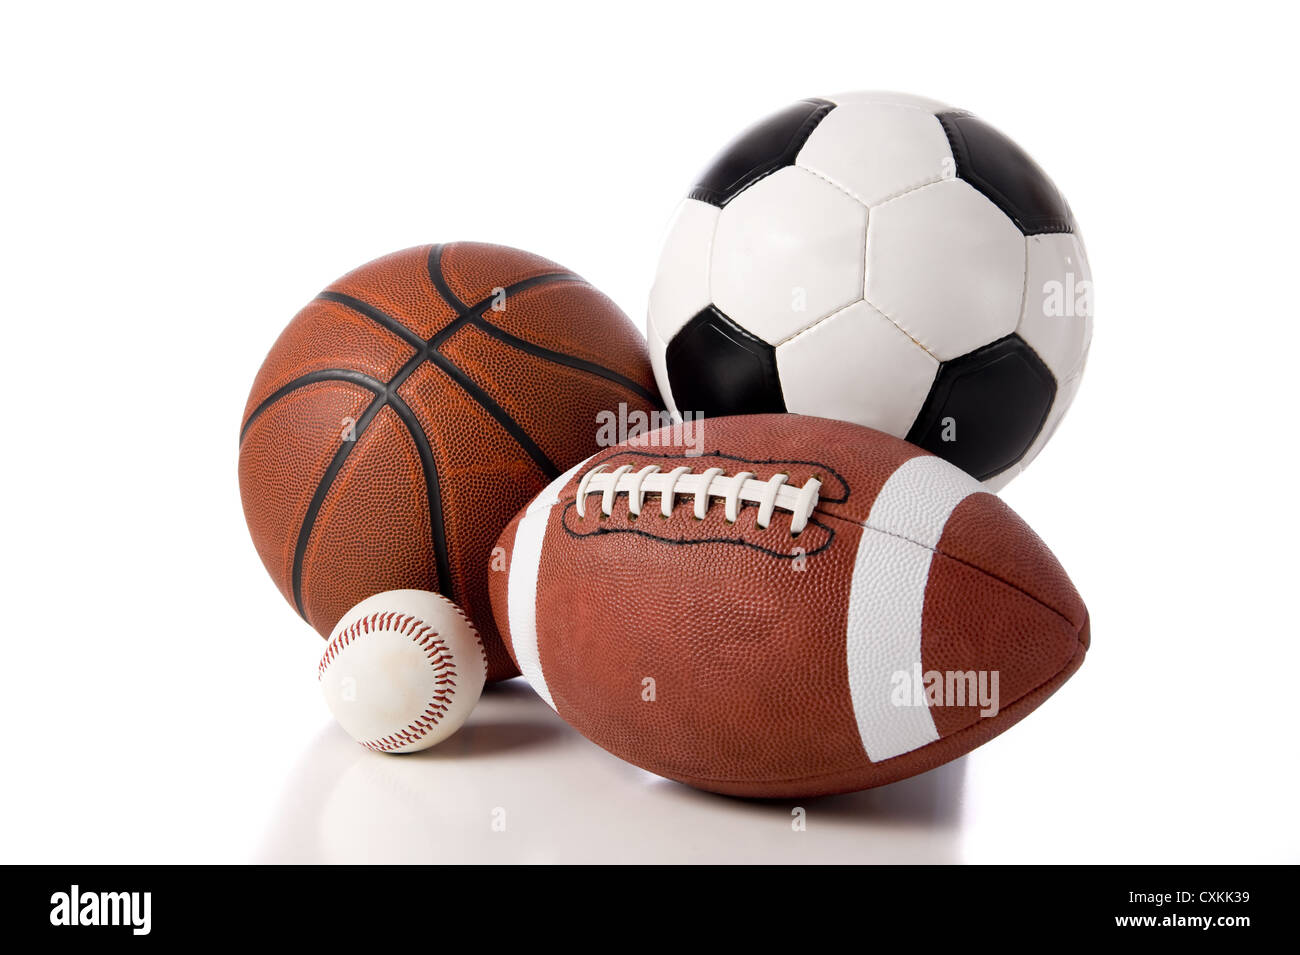 A group of sports balls on a white background, including a baseball, an American football, a basketball, and a soccer ball Stock Photo